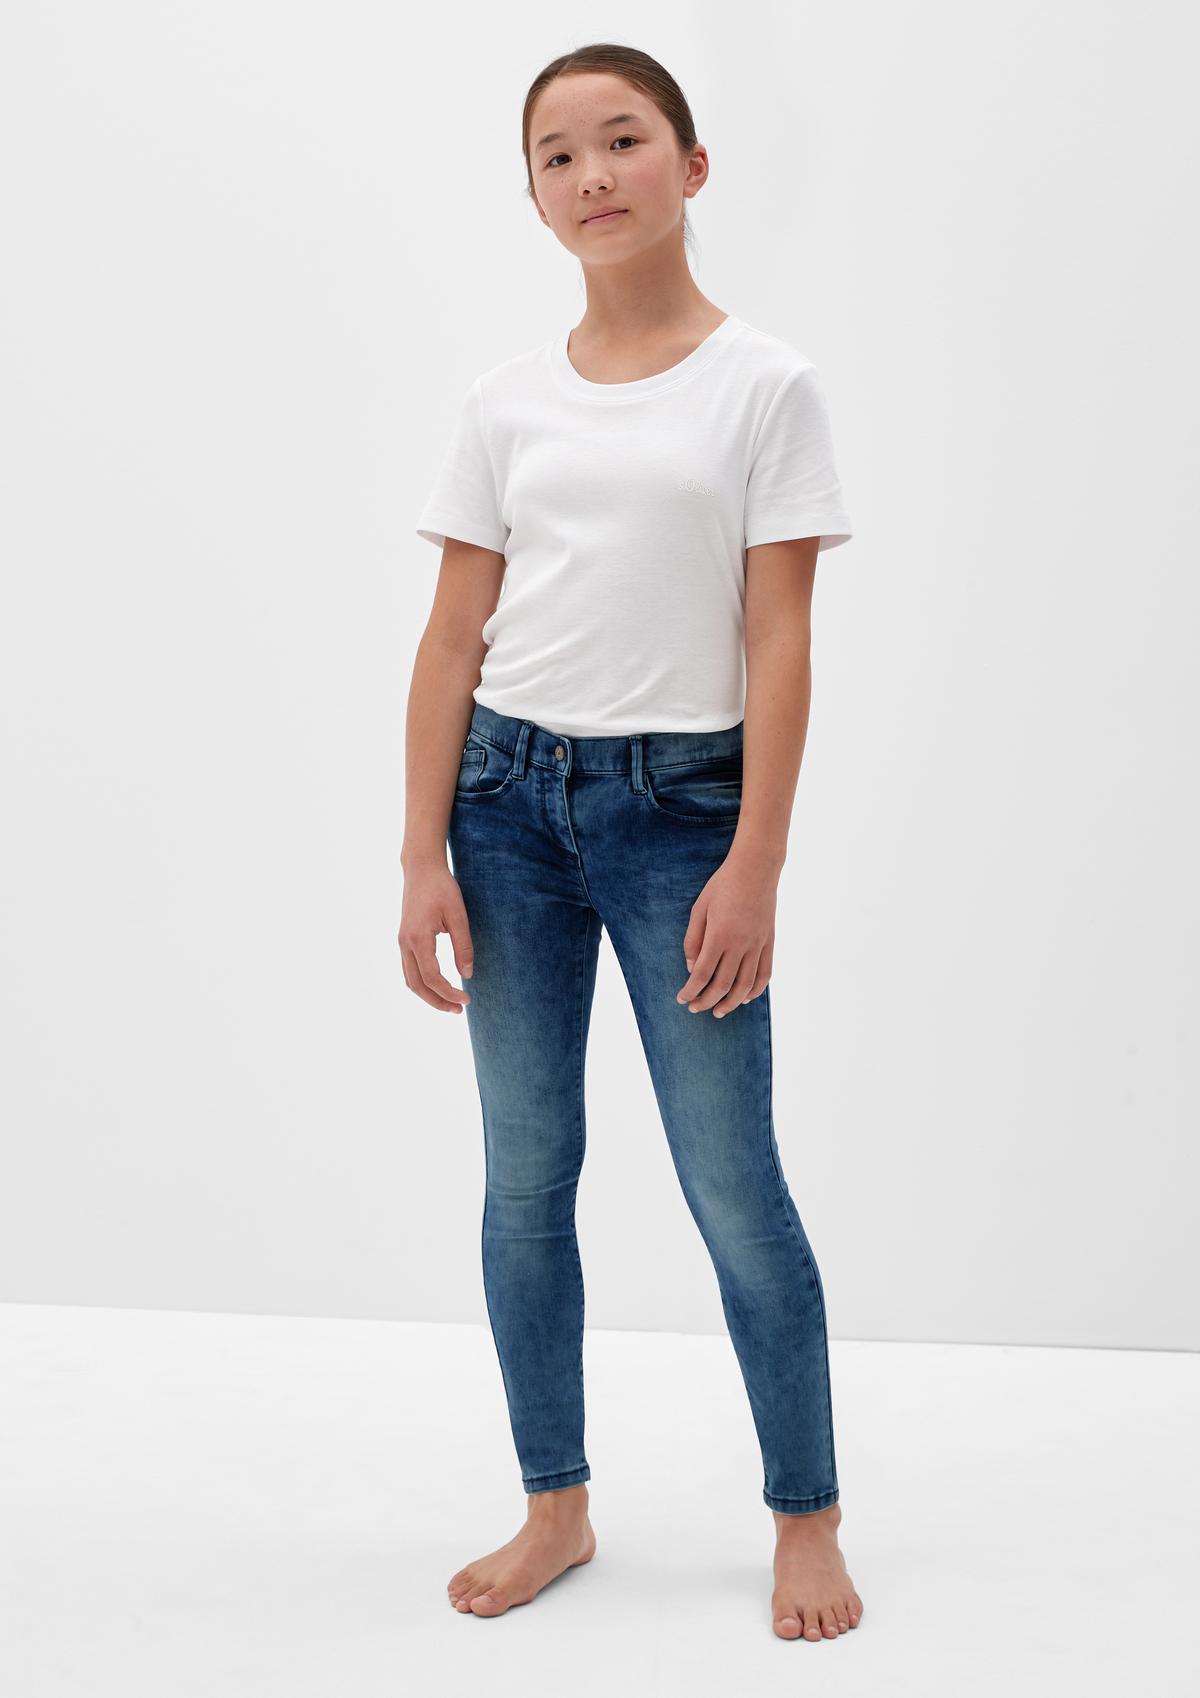 Shop jeans for girls online and teens